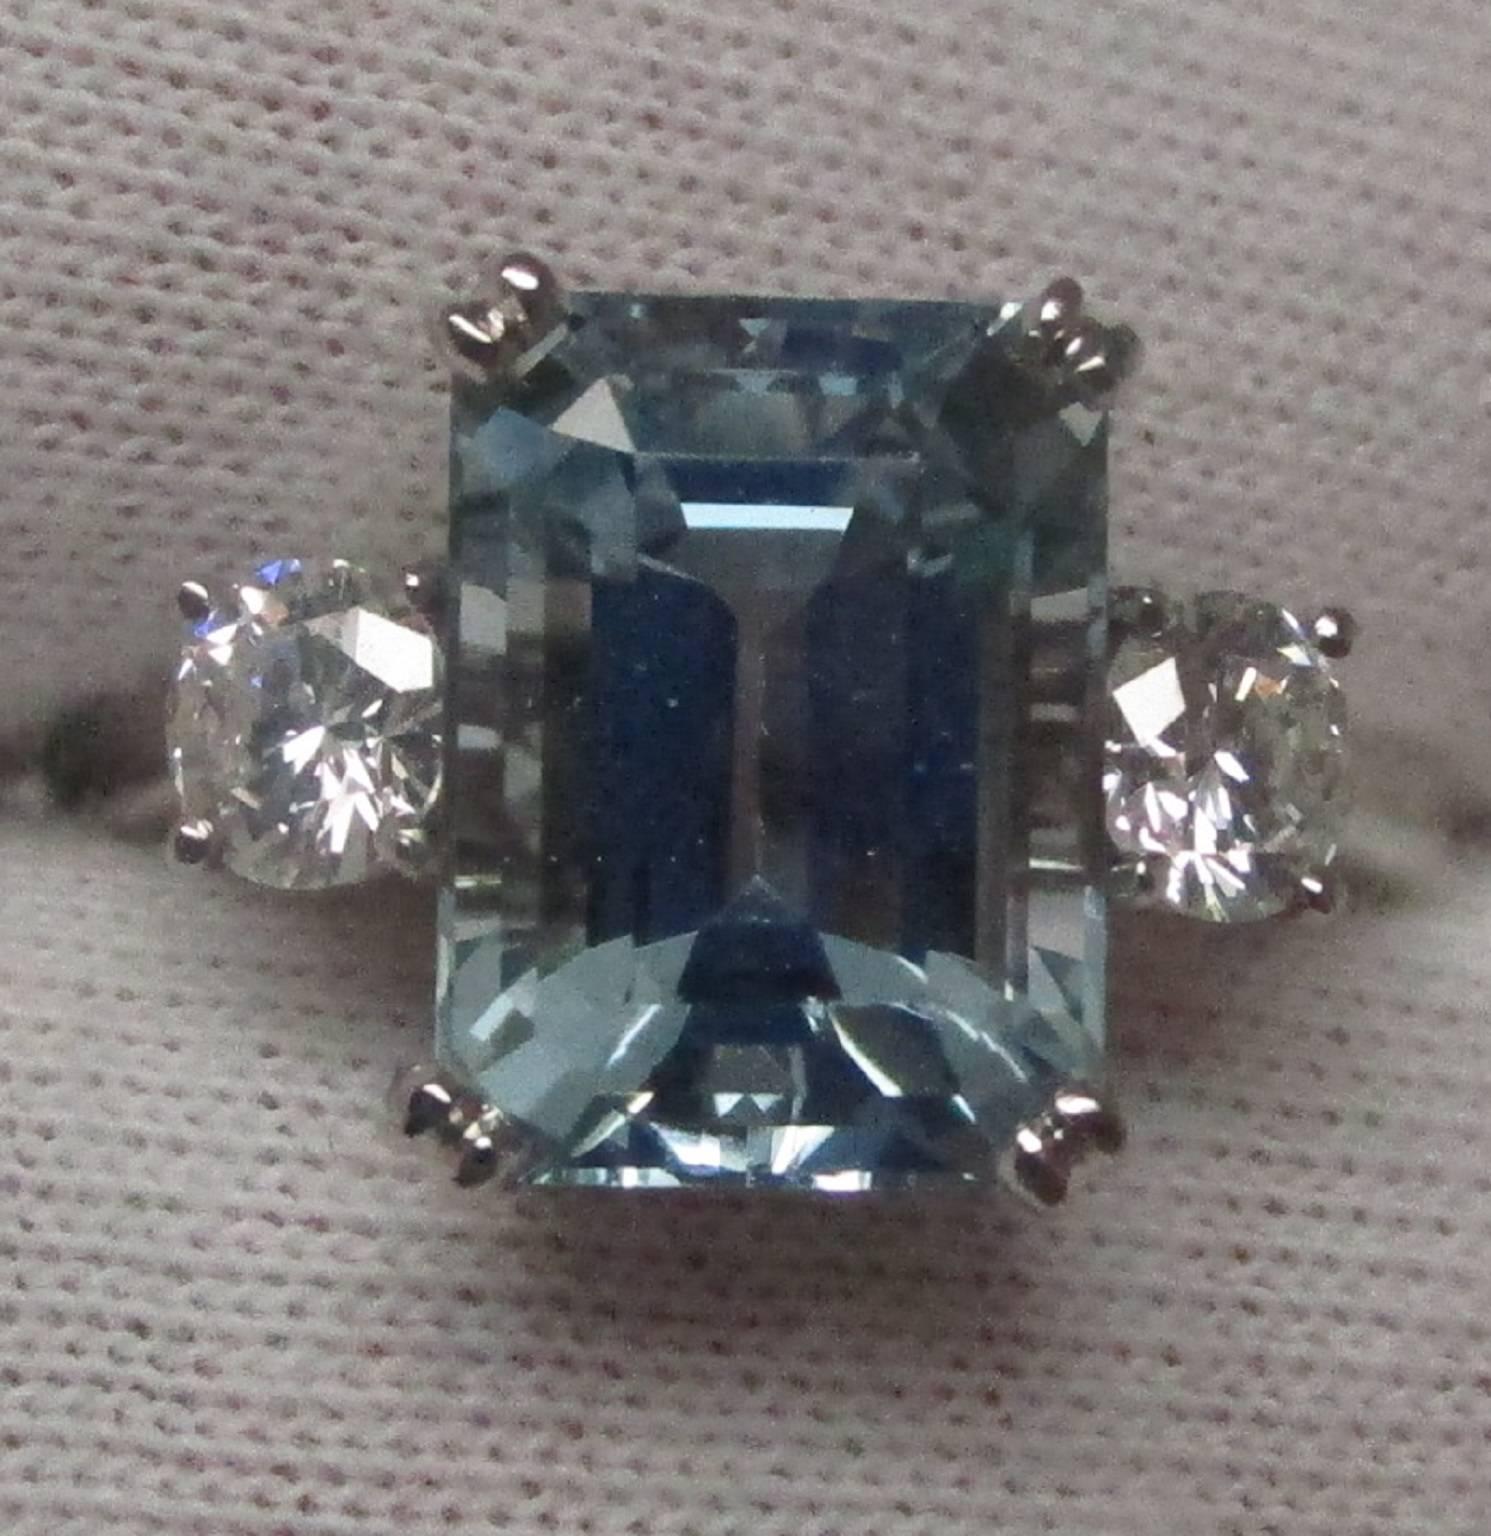 This aquamarine ring is a subtle stone-blue color that radiates poise and refinement. This ring is glacial and cool, which is enhanced by the platinum setting. The aquamarine is 4.23 carats, and it is big and bold, but not overbearing. There are two